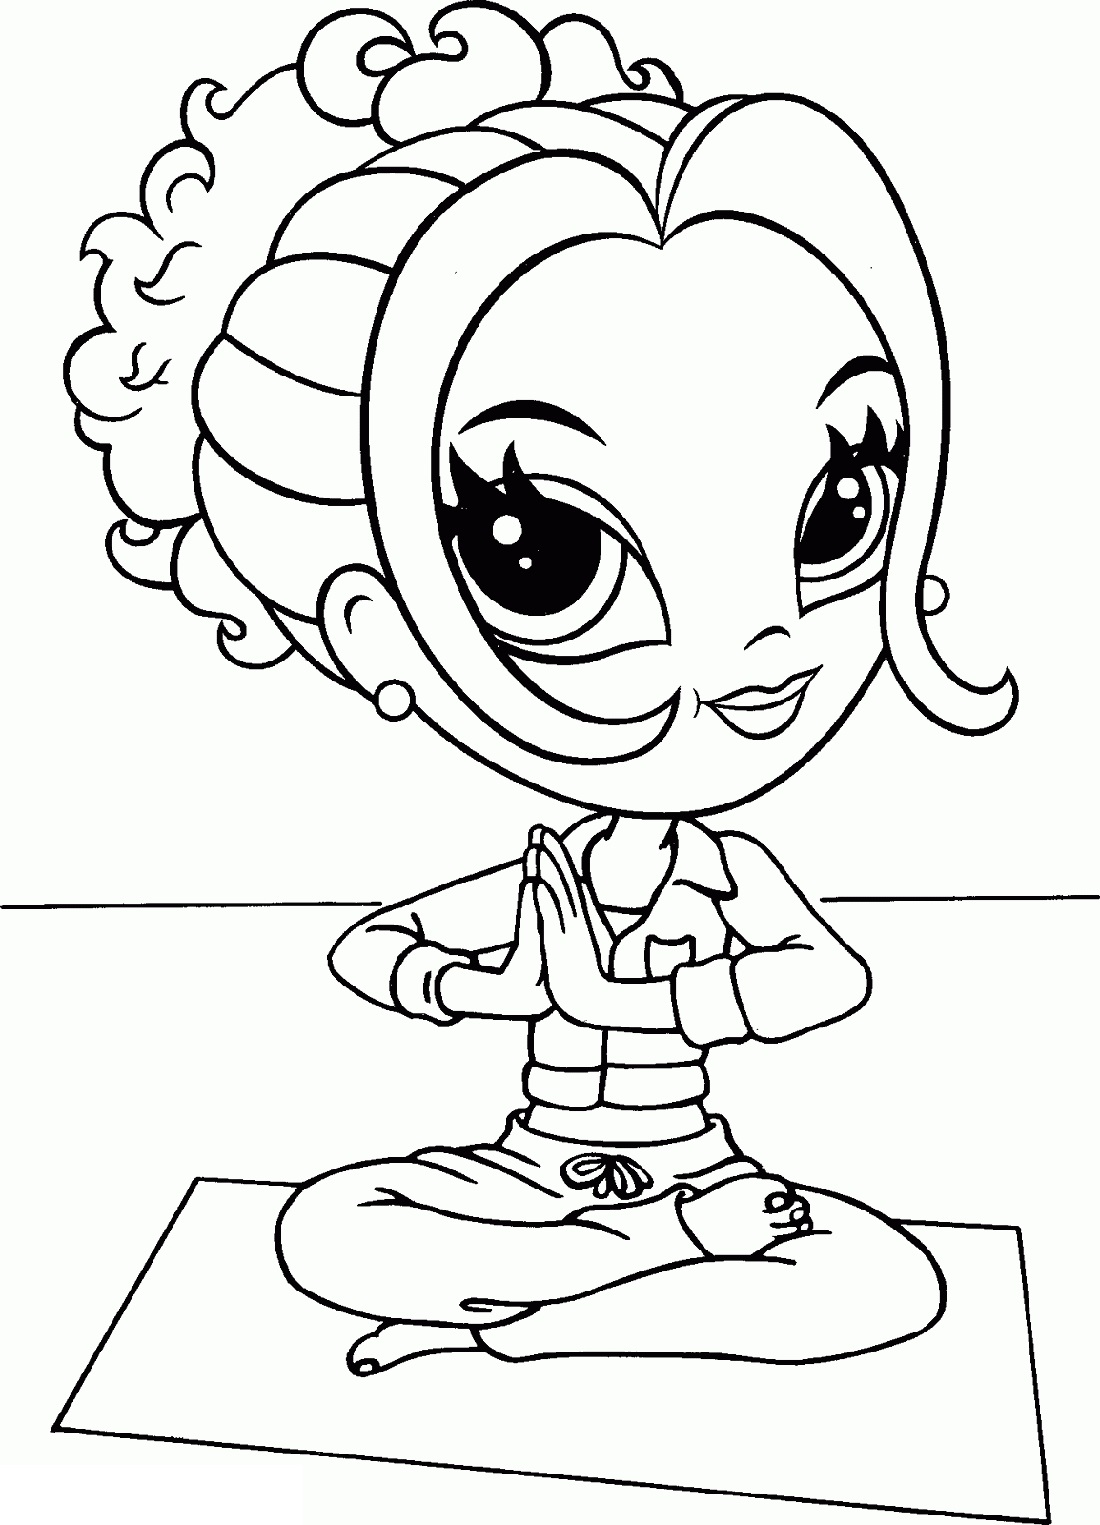 Mindfulness and Yoga Coloring Pages | 101 Activity